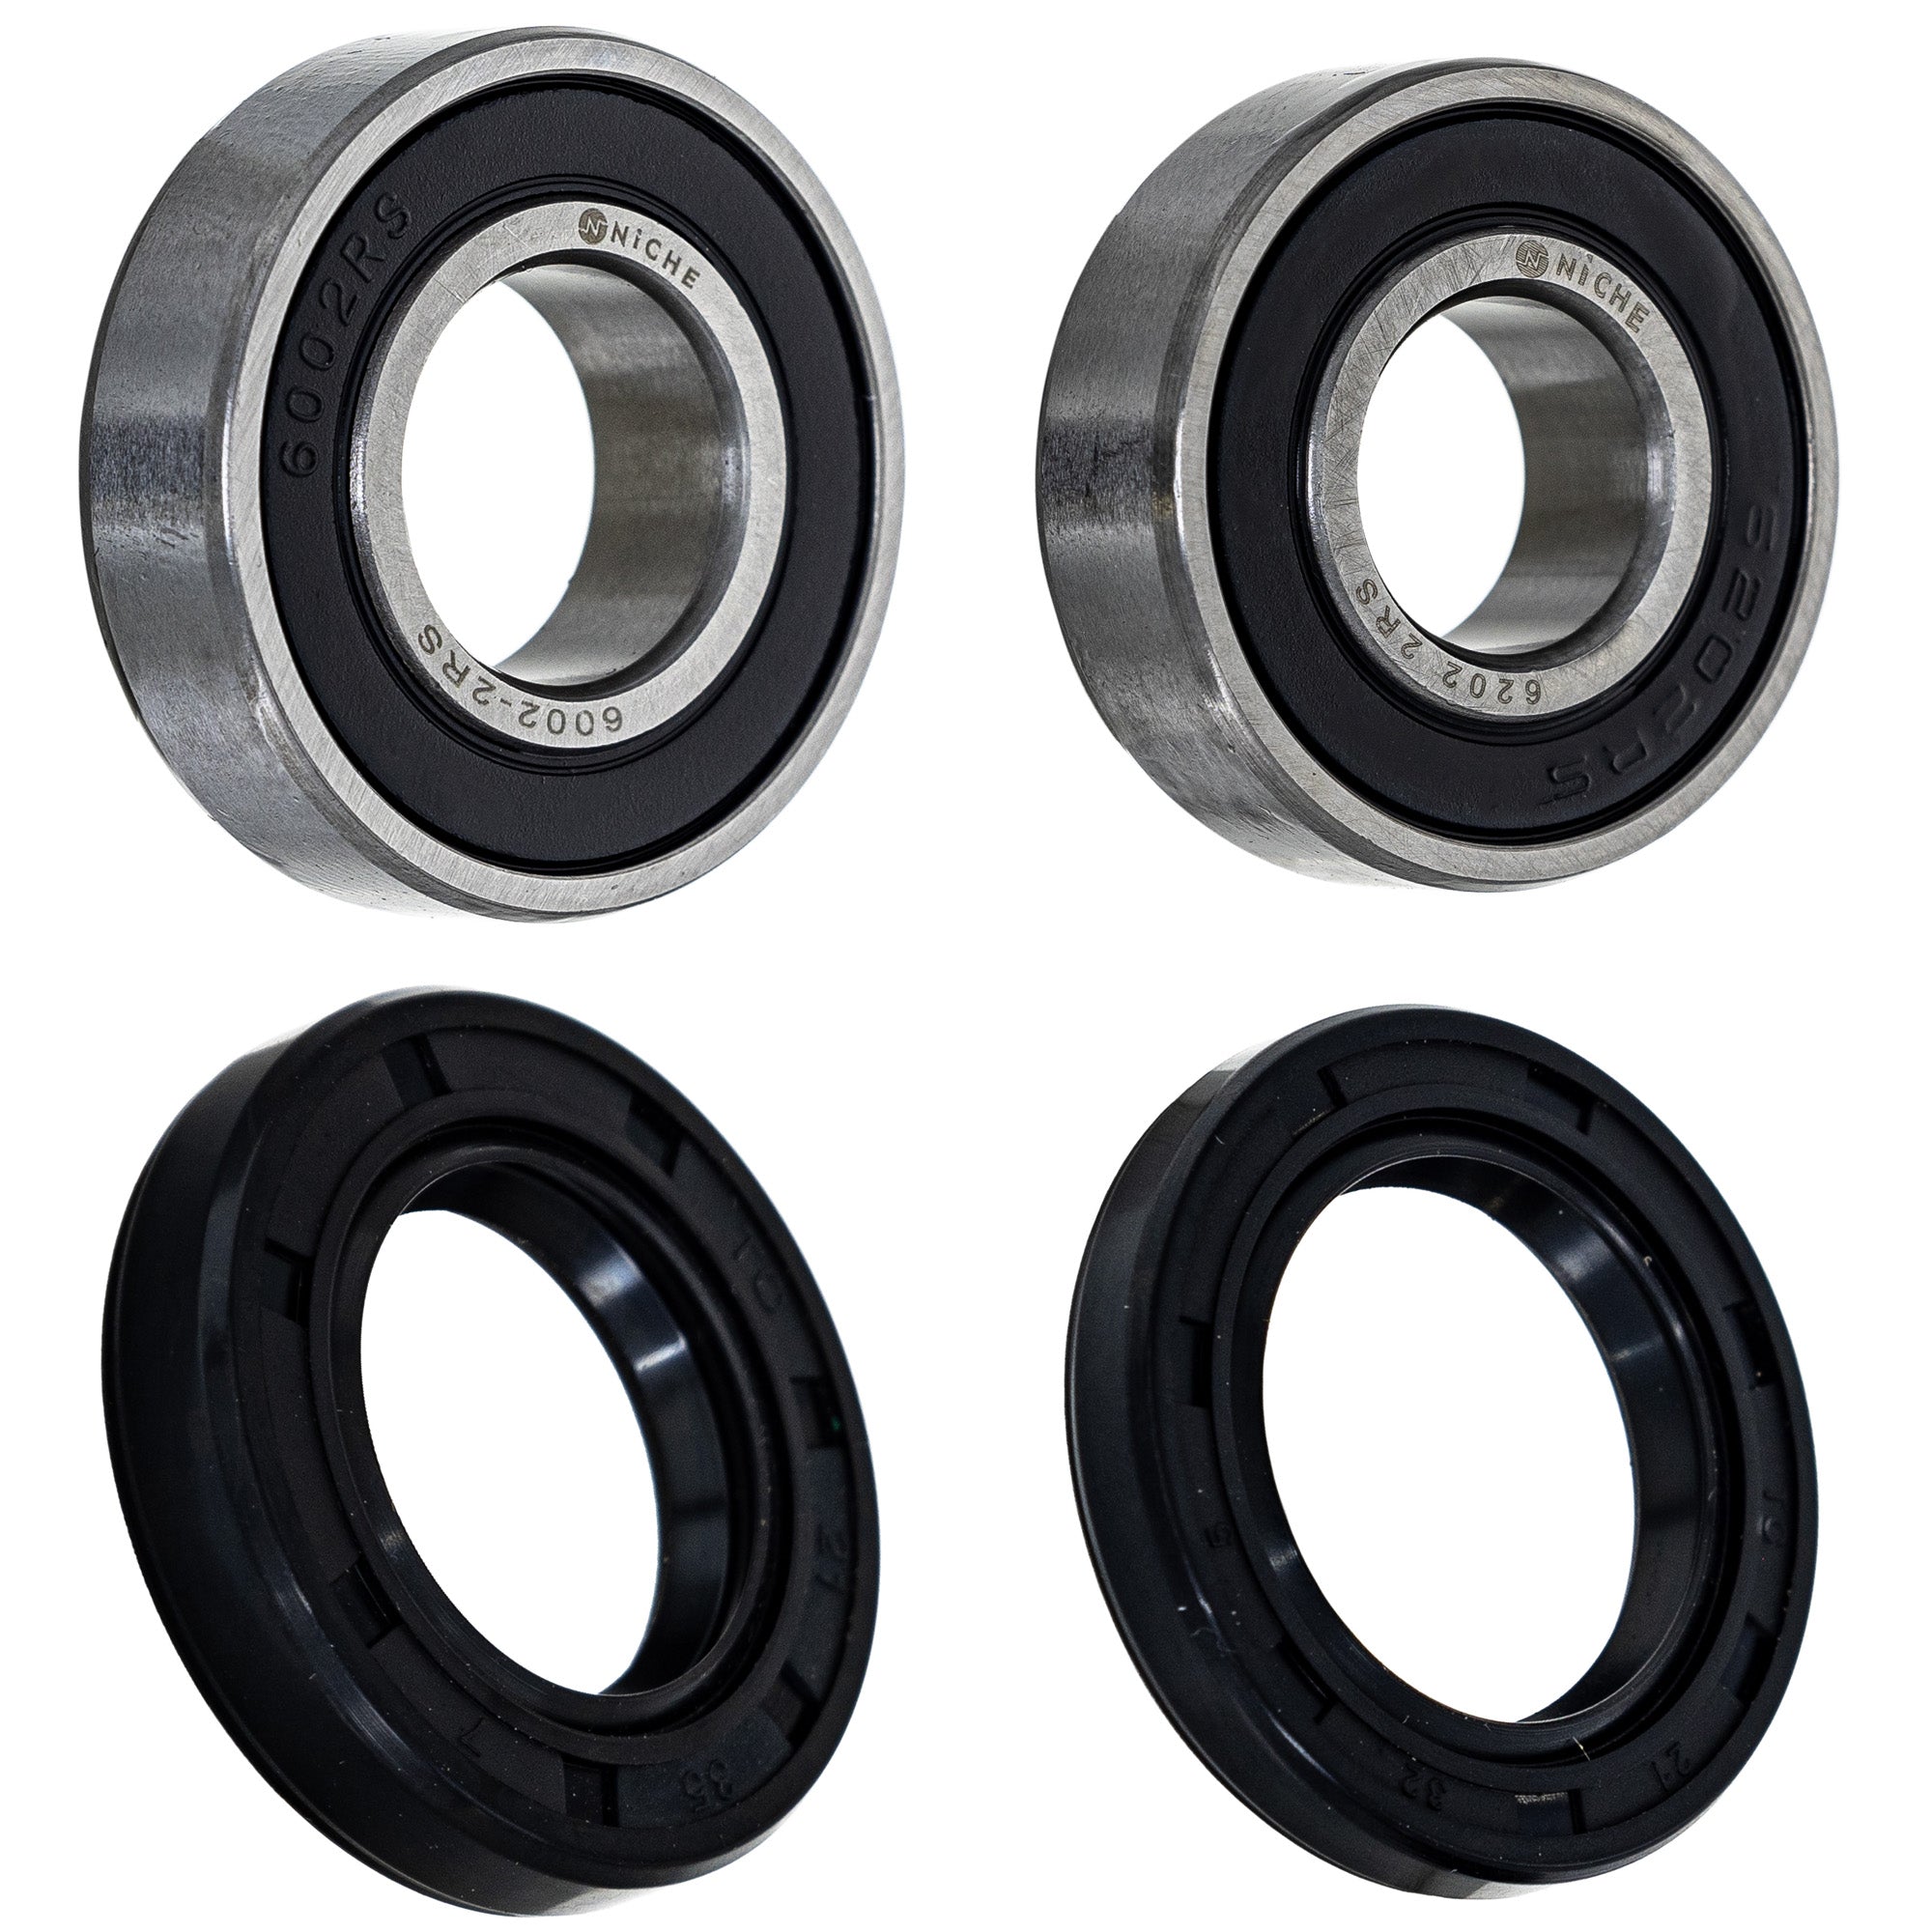 Wheel Bearing Seal Kit for zOTHER Ref No TS400 T500 Expert CR80R NICHE MK1008842